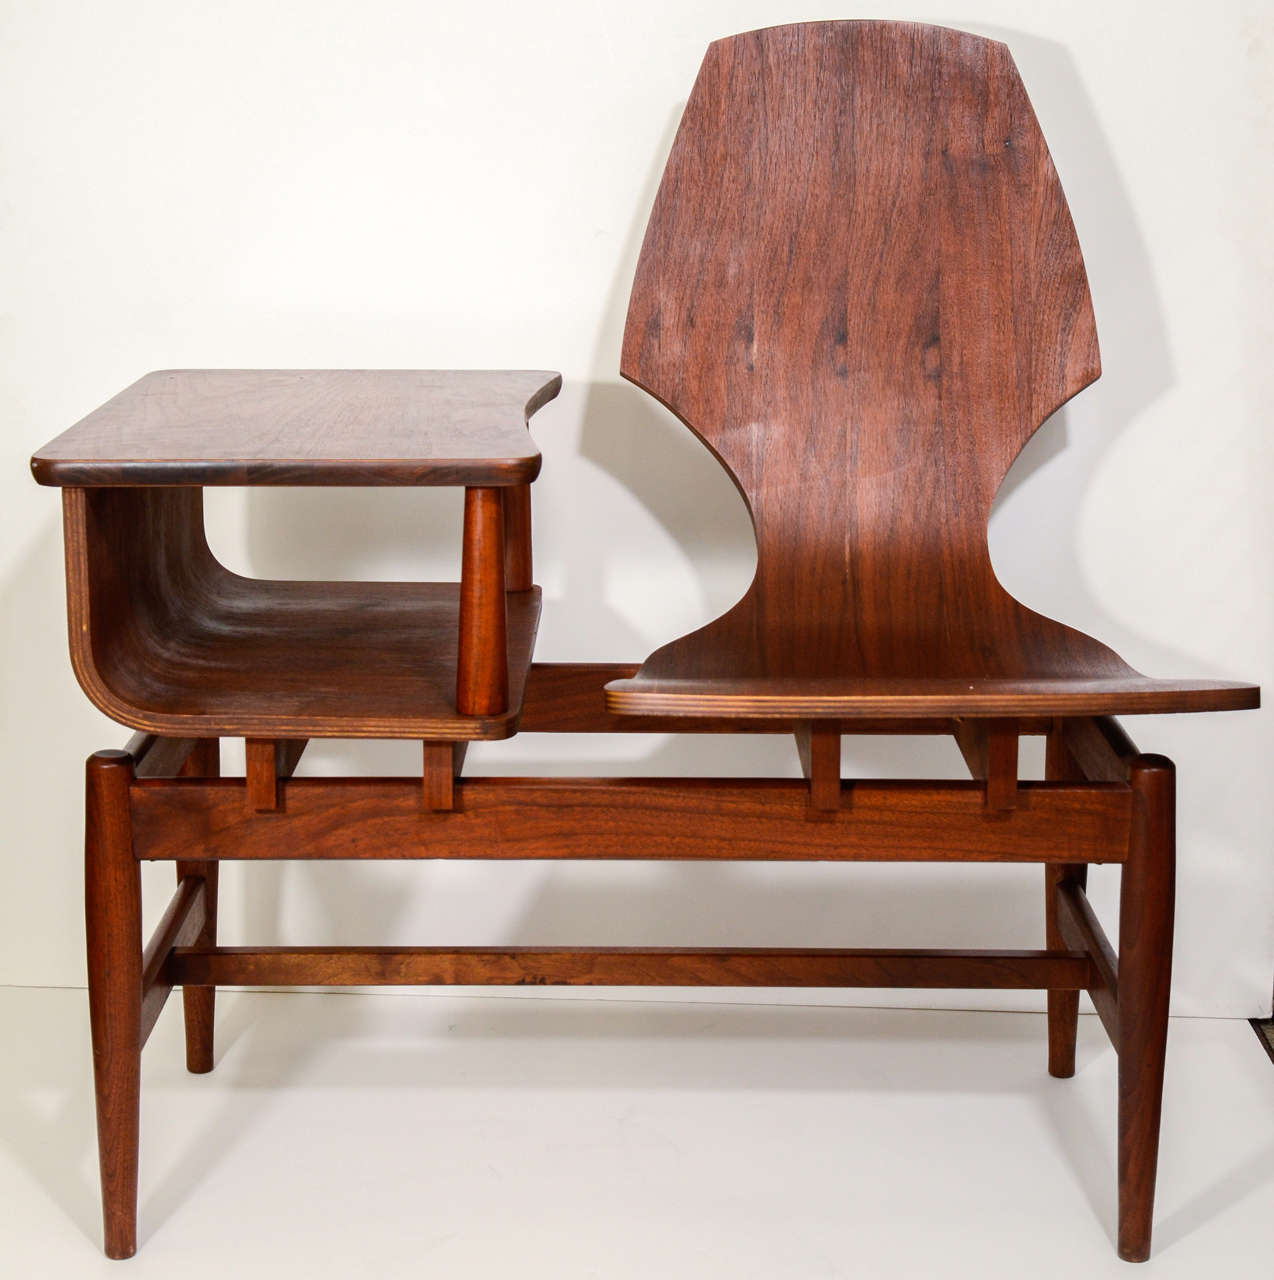 A vintage Danish Modern chair and side table combination in wood.

Please Note: The piece currently available is the opposite configuration from the one pictured; the seat is on the left with the table on the right.